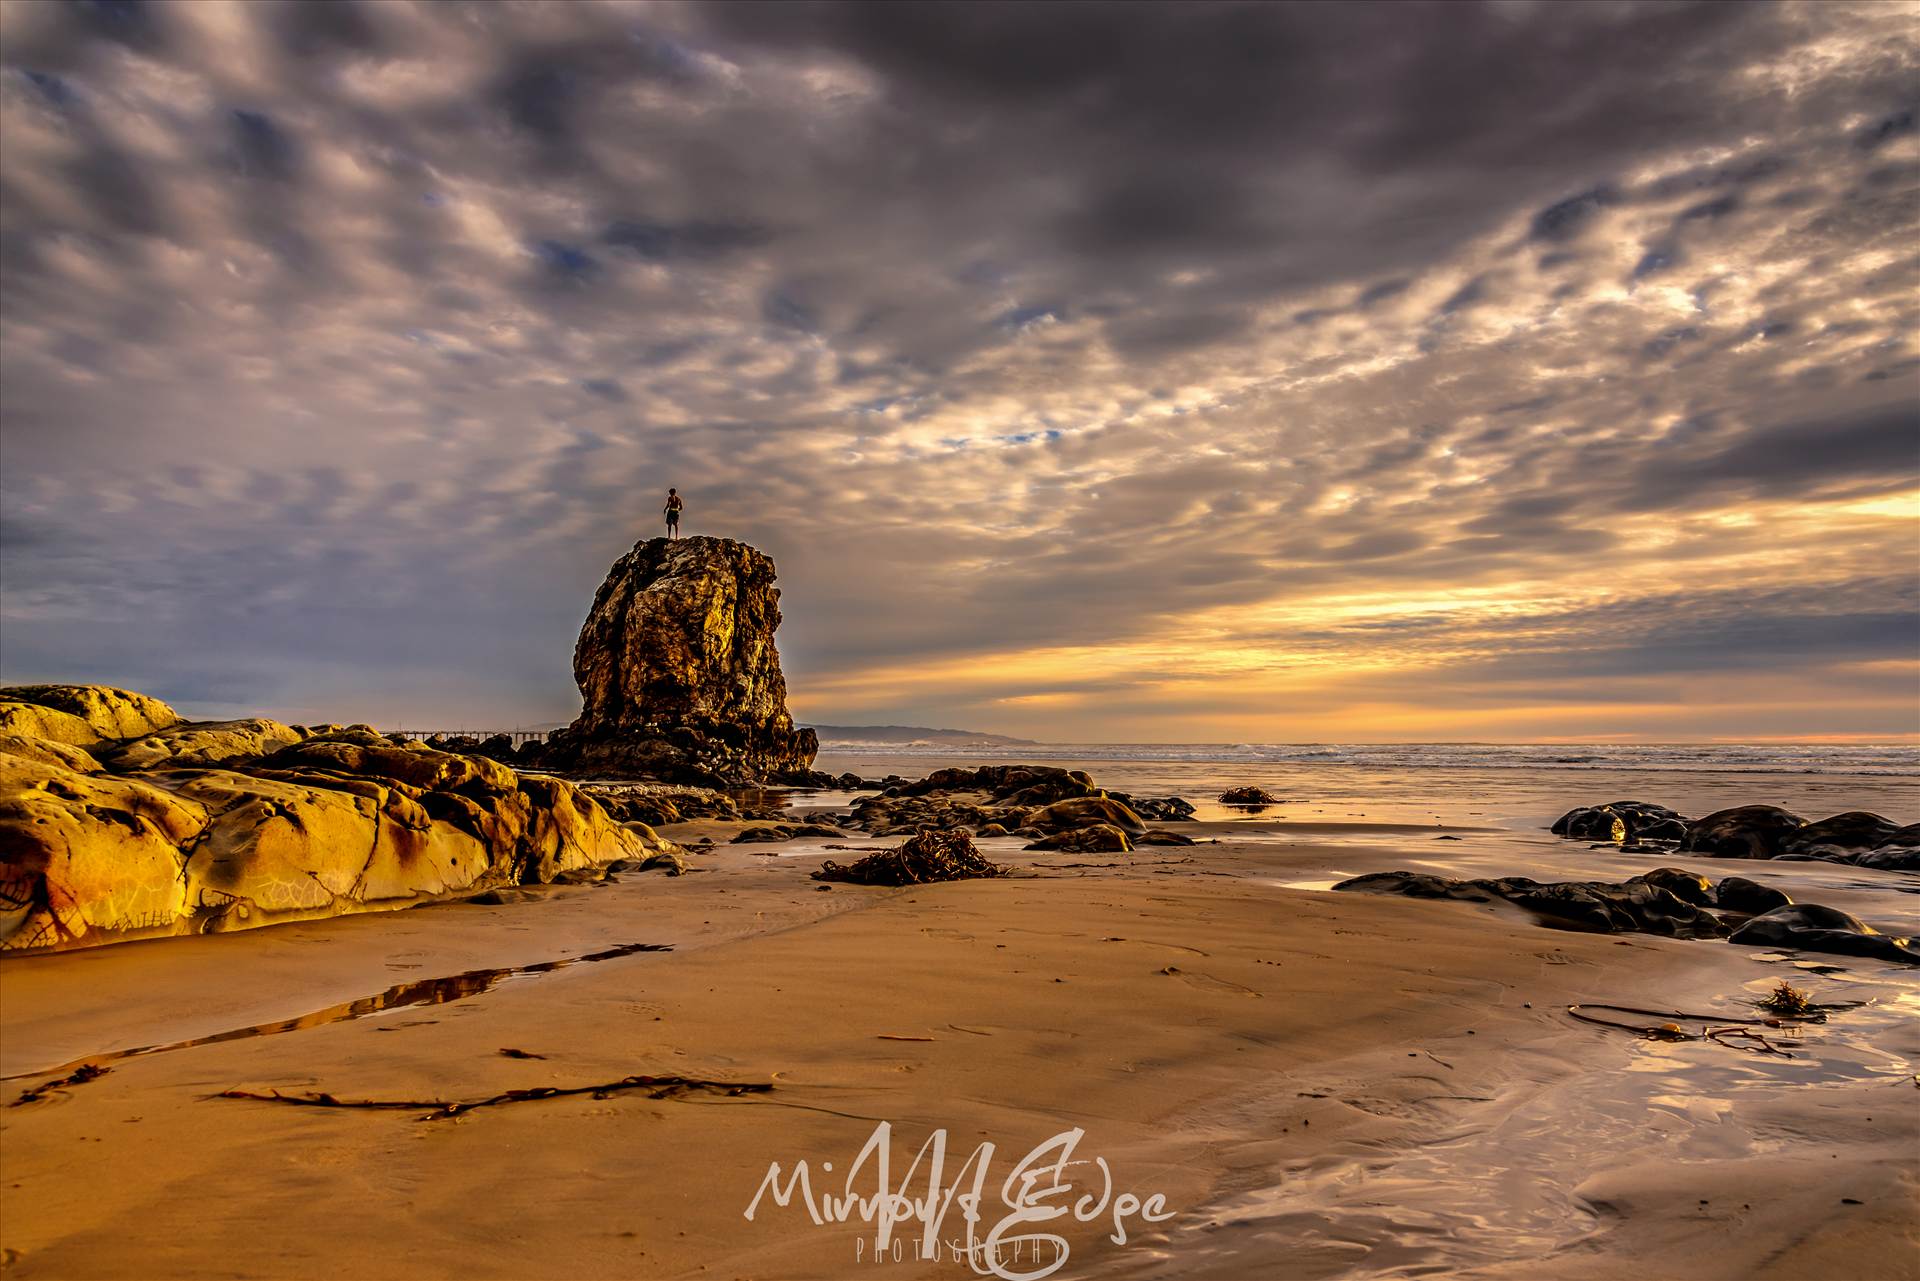 Man on Lonely Rock 010816.jpg undefined by Sarah Williams